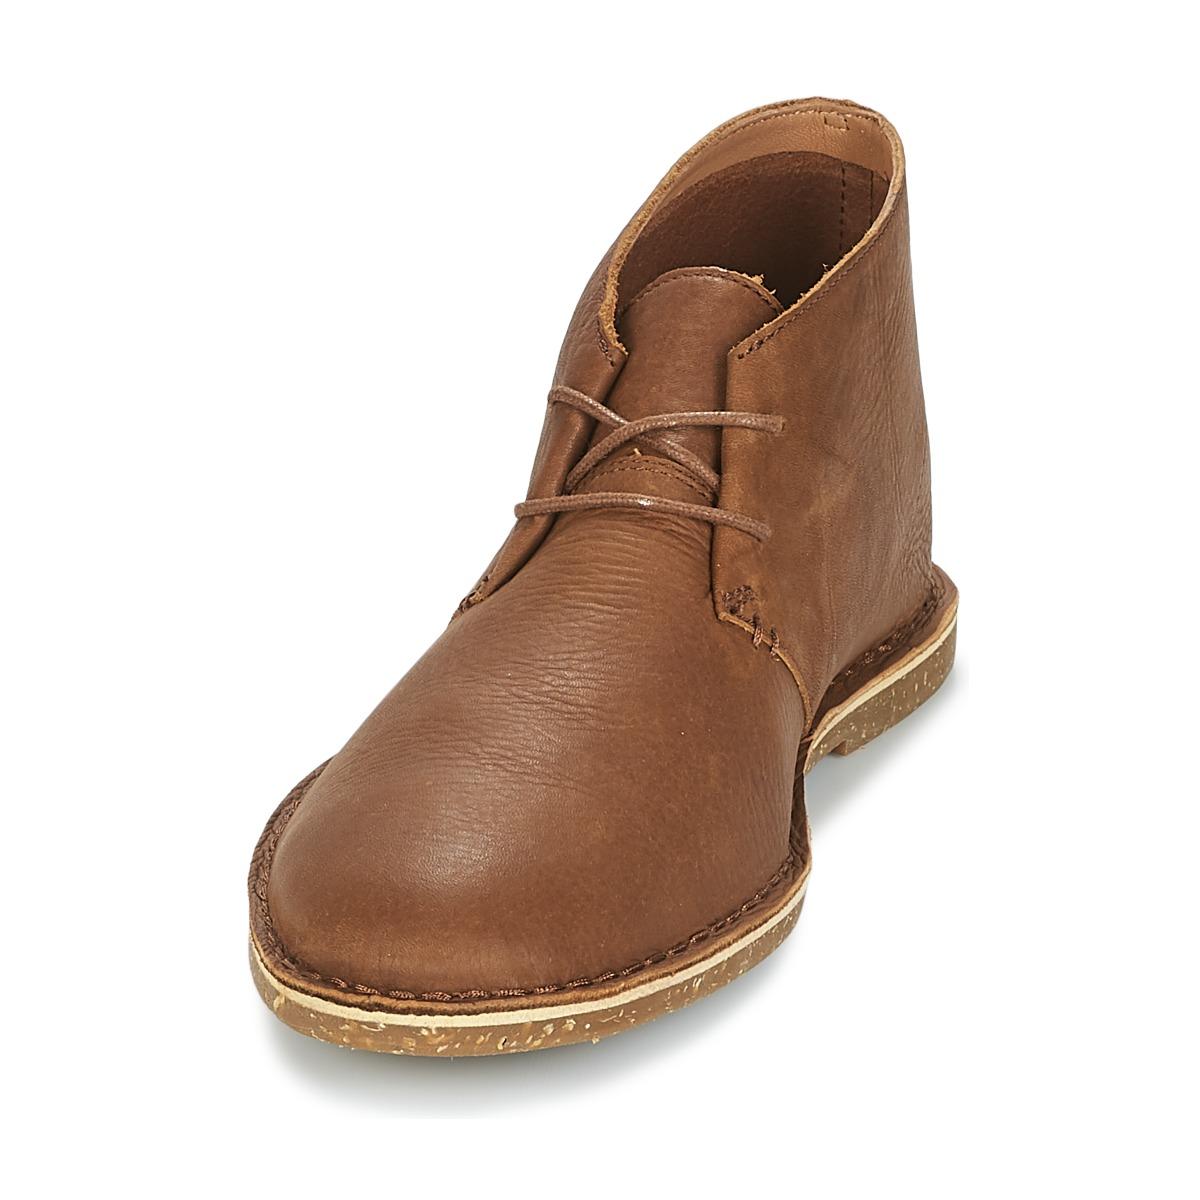 Clarks Baltimore Mid Hotsell, SAVE 54%.